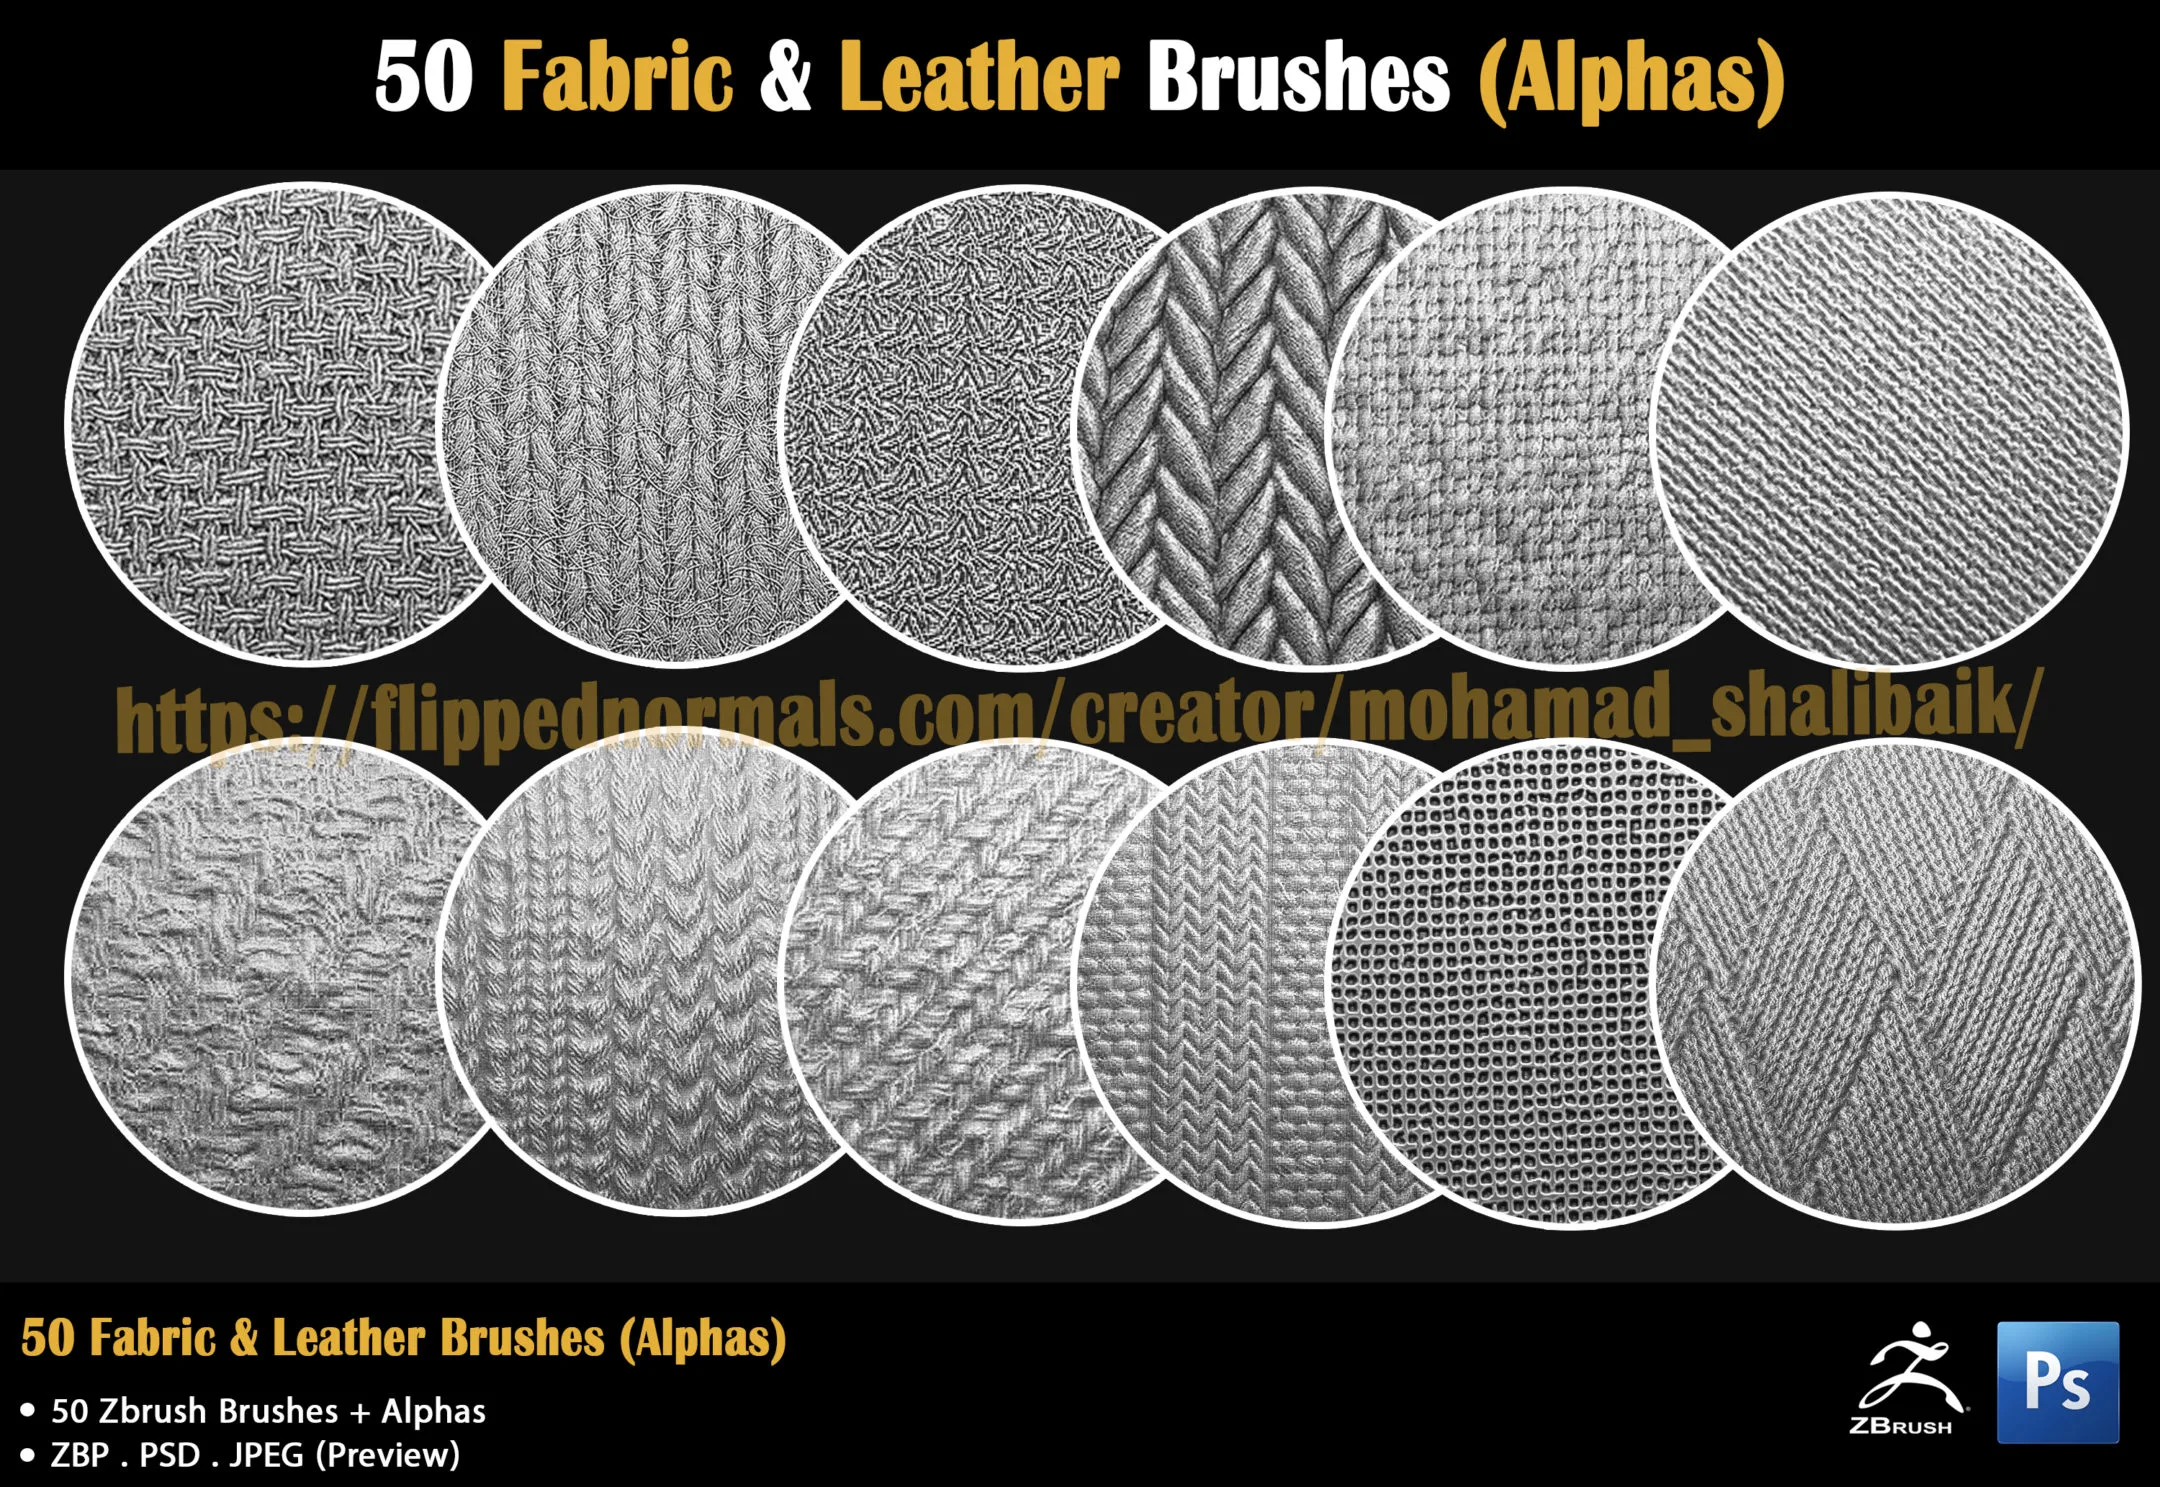 50 Fabric & Leather Brushes (Alphas)